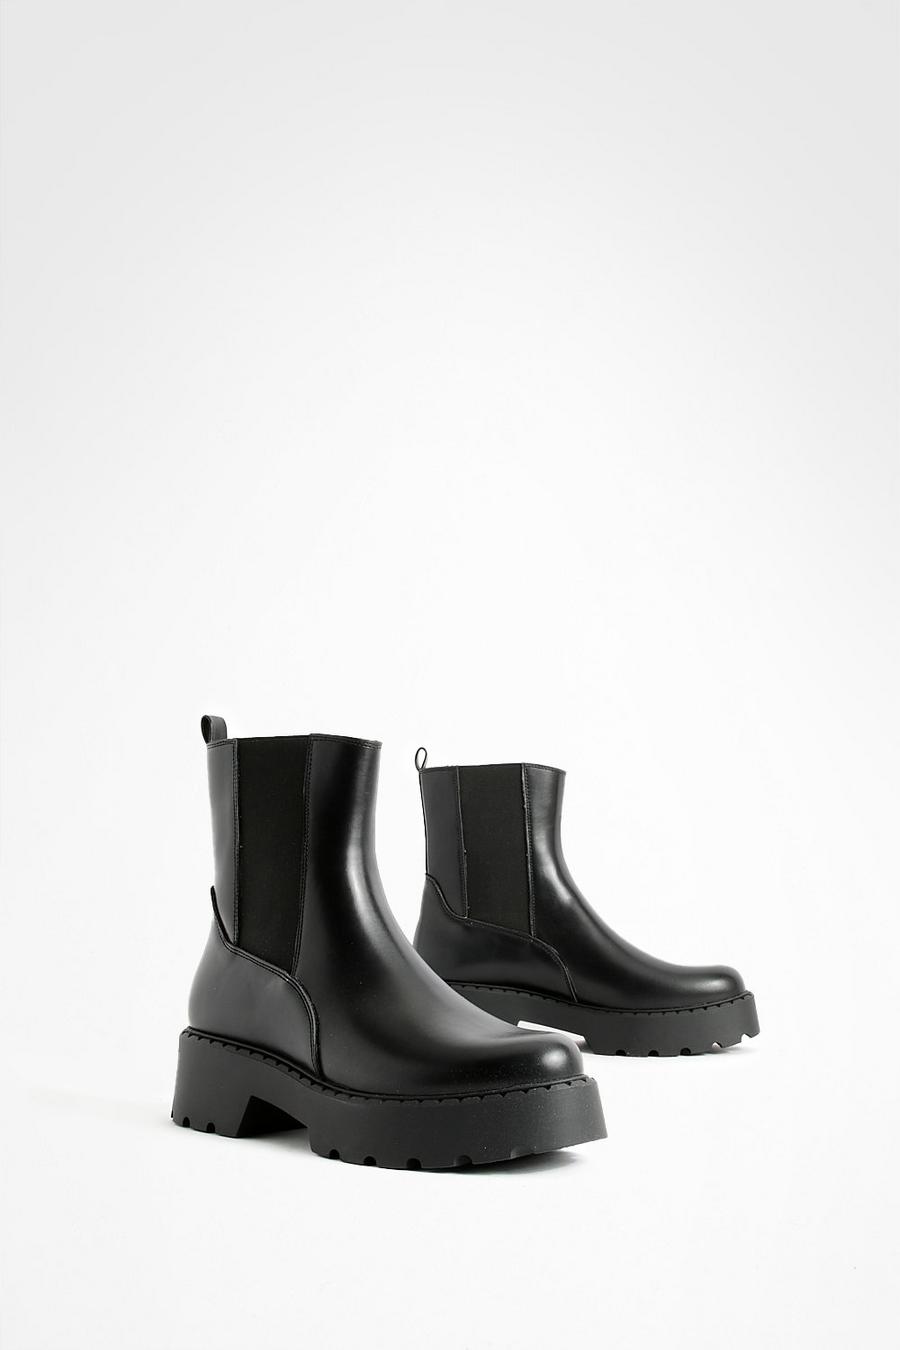 Black Cleated Sole Chelsea Boots